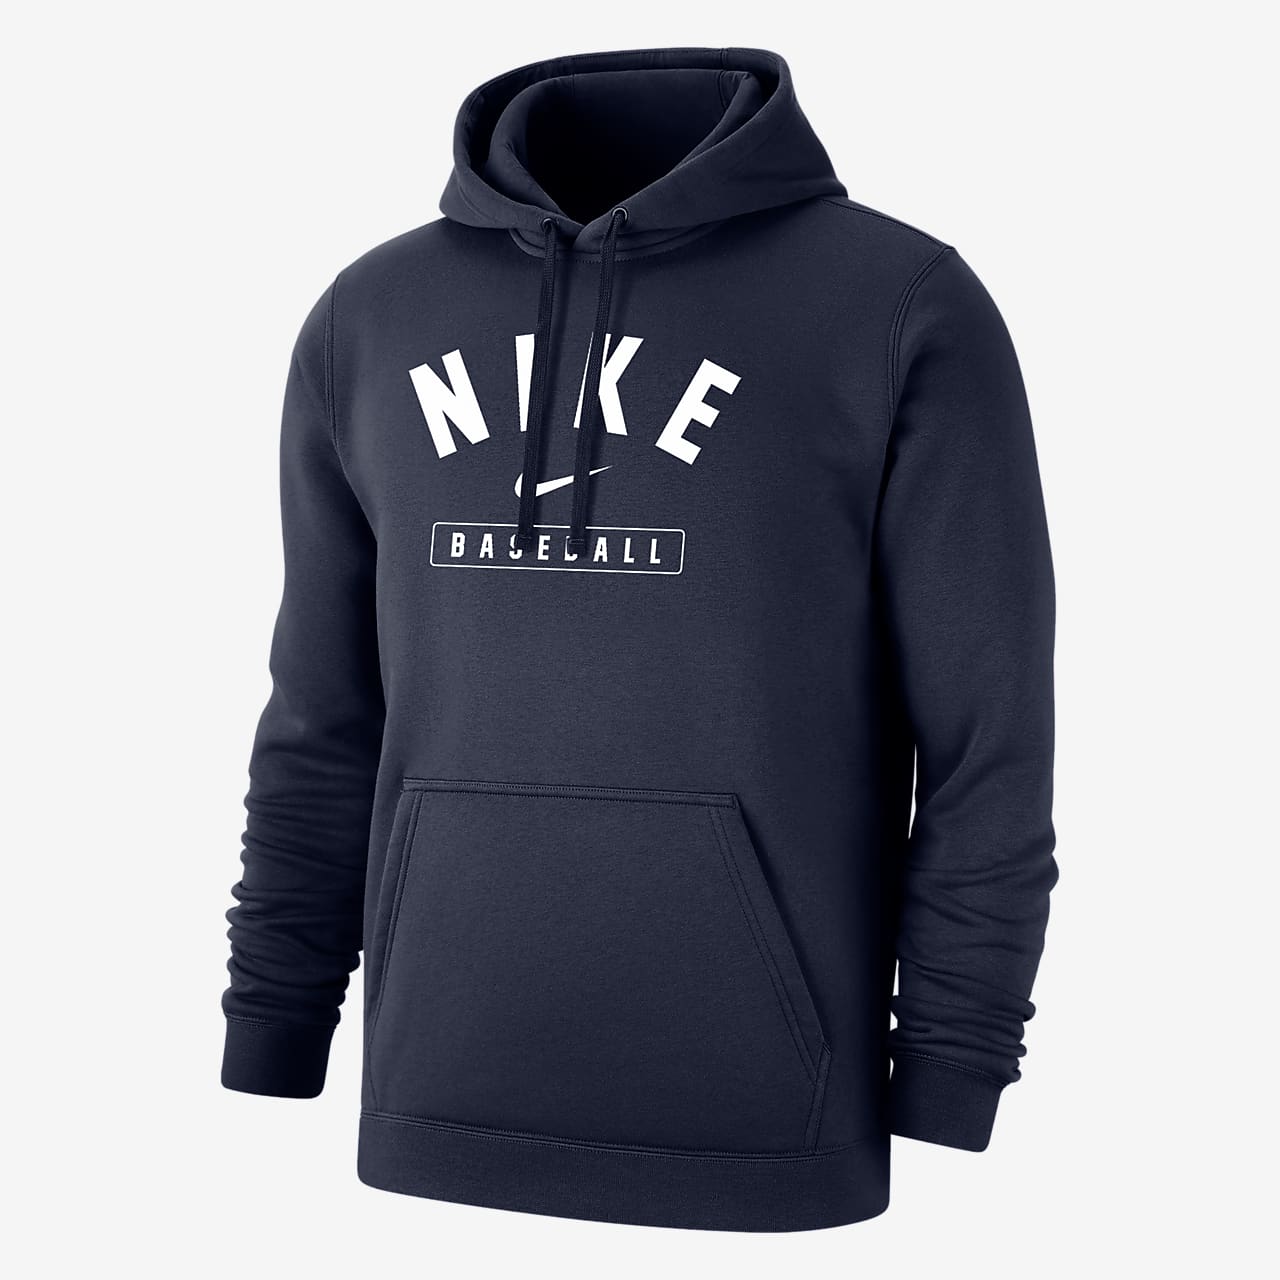 https://static.nike.com/a/images/t_PDP_1280_v1/f_auto/037d95b4-6aa8-4413-a07f-53974c4a0a72/baseball-mens-pullover-hoodie-2P8ZFZ.png